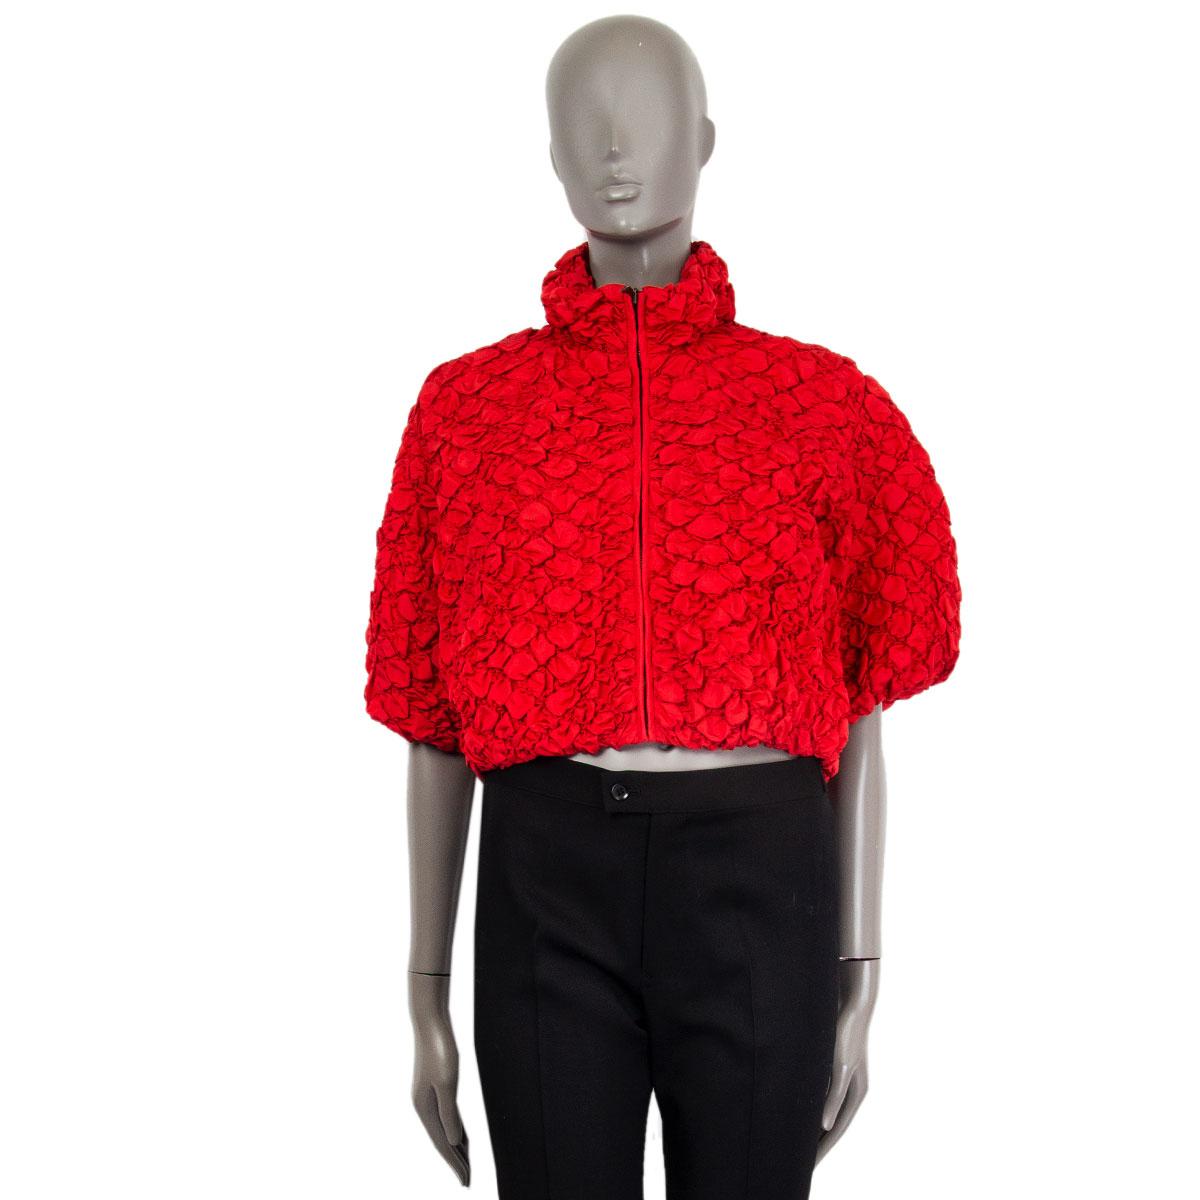 Prada quilted ruched cropped jacket in red silk (56%) and polyester (44%) with a high neck and 3/4 sleeves. Closes on the front with a zipper. Line in silk (assumed as content is missing). Has been worn and is in excellent condition. 

Tag Size 42